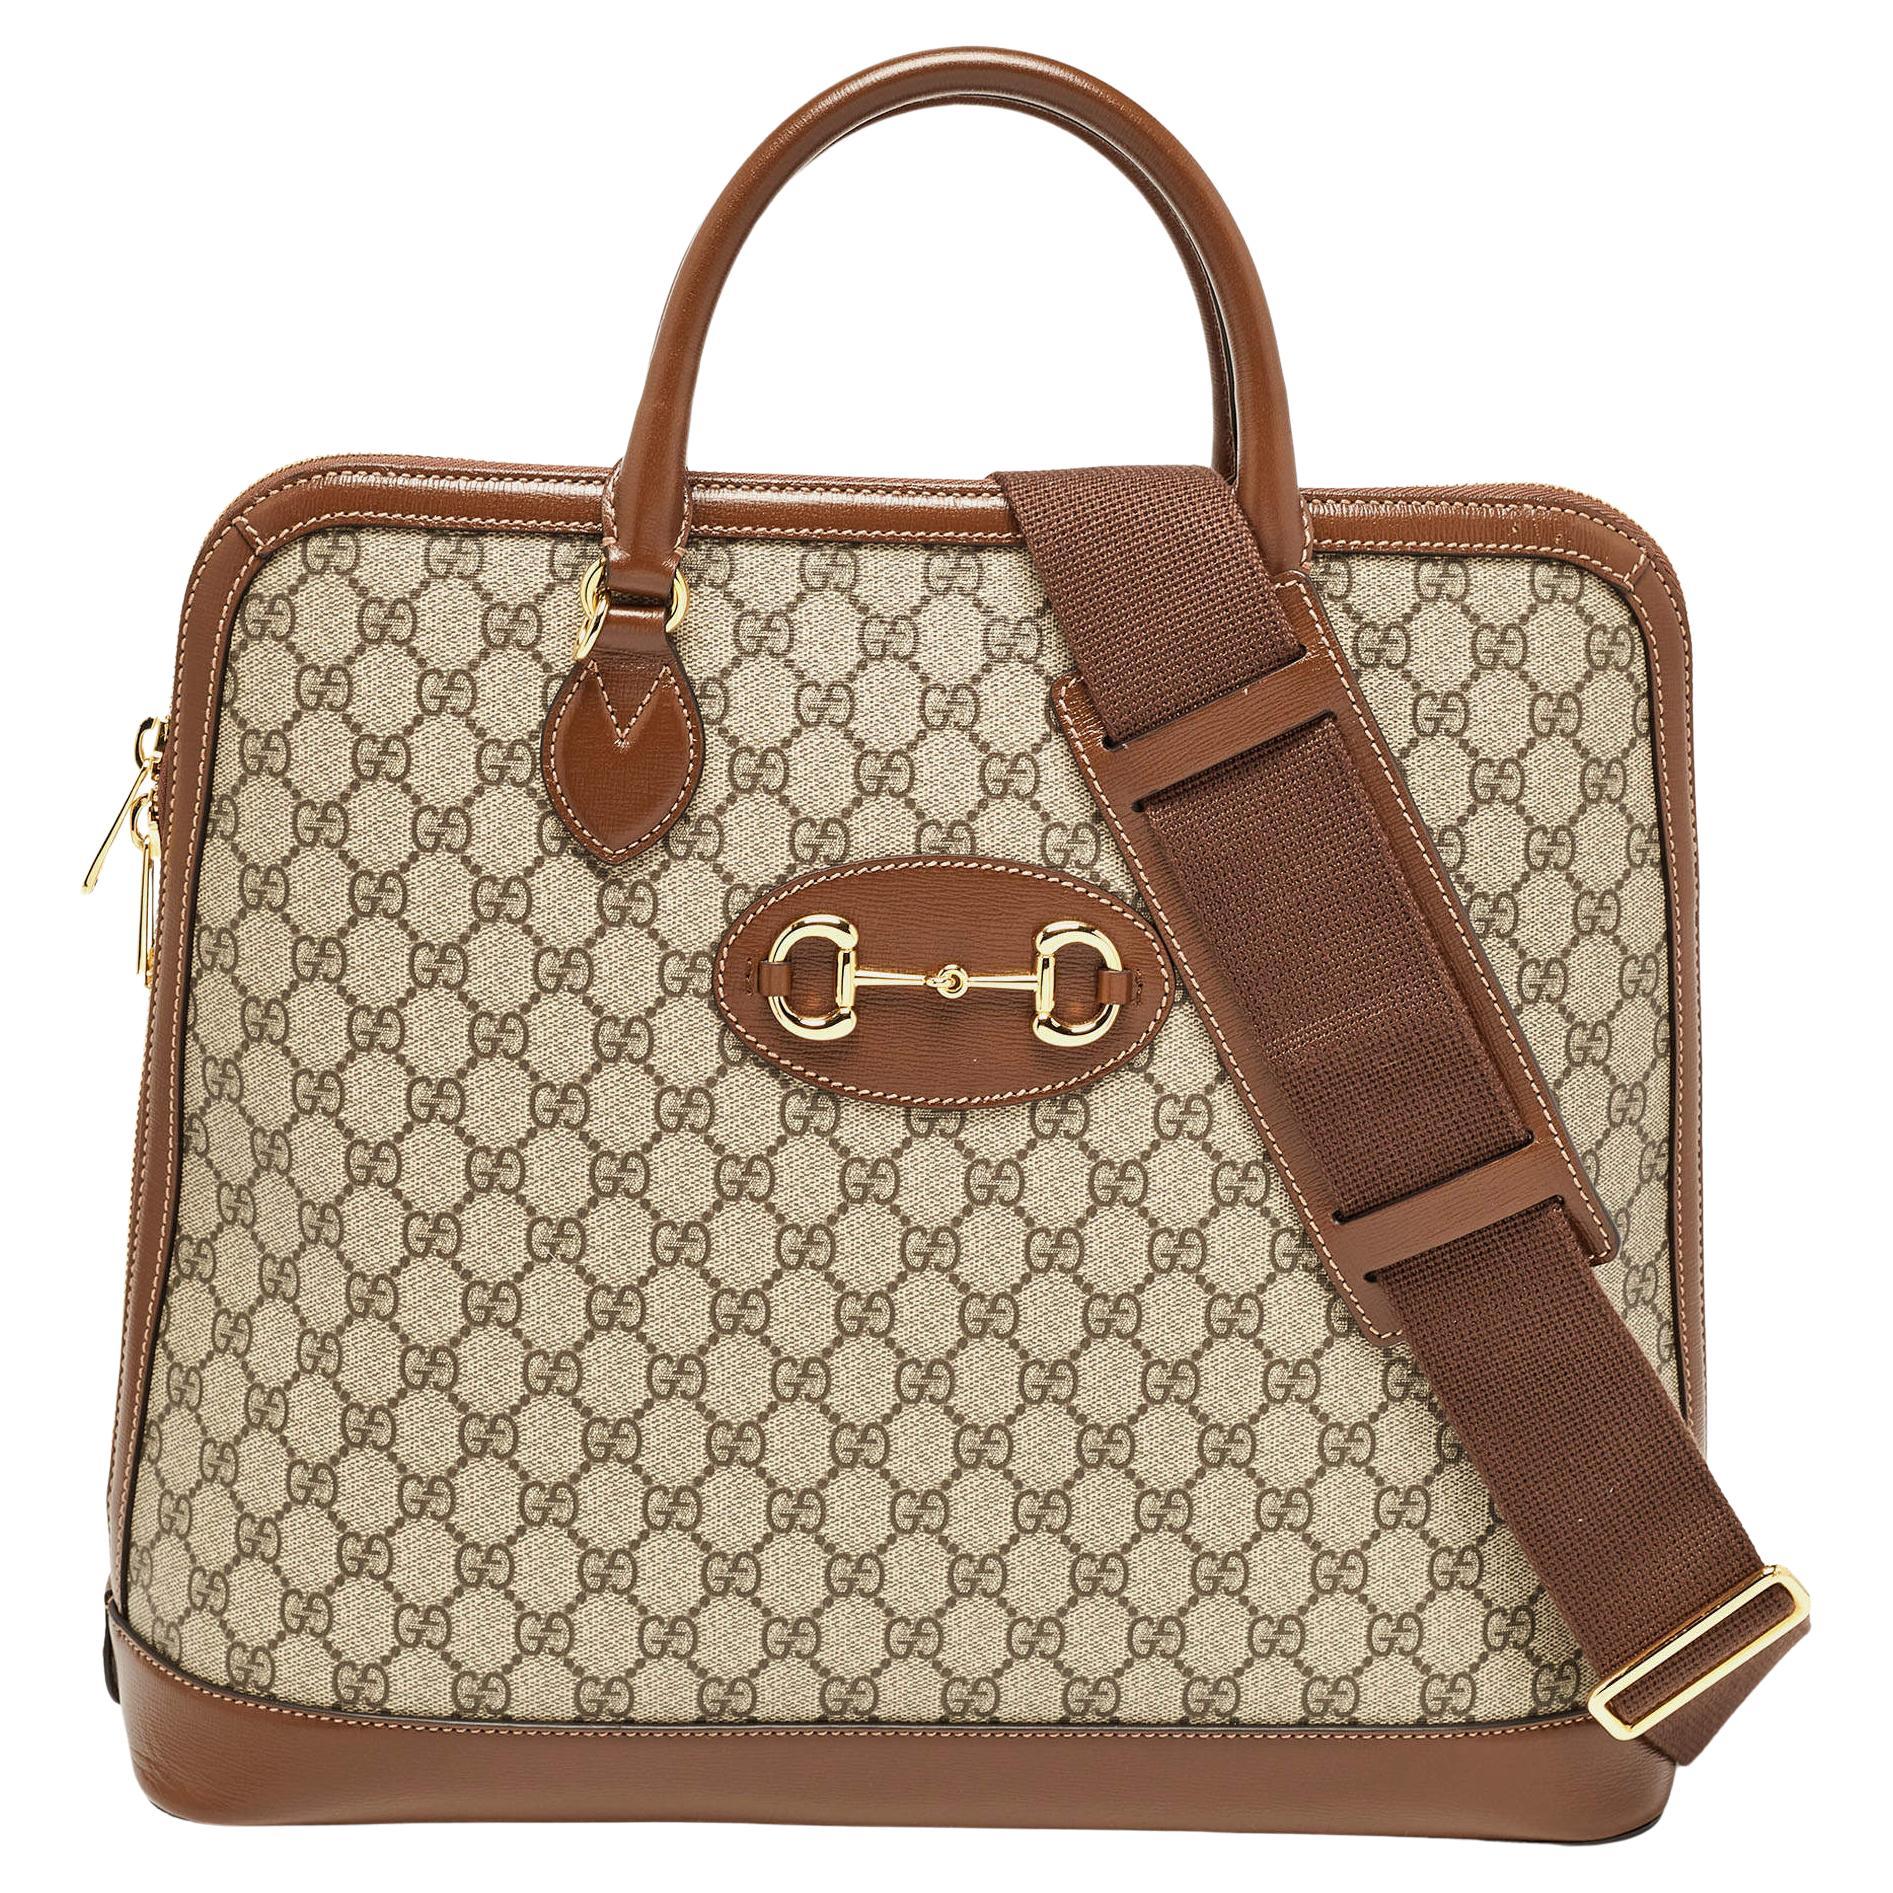 Gucci Brown/Beige GG Supreme Canvas and Leather Horsebit 1955 Duffel Bag For Sale